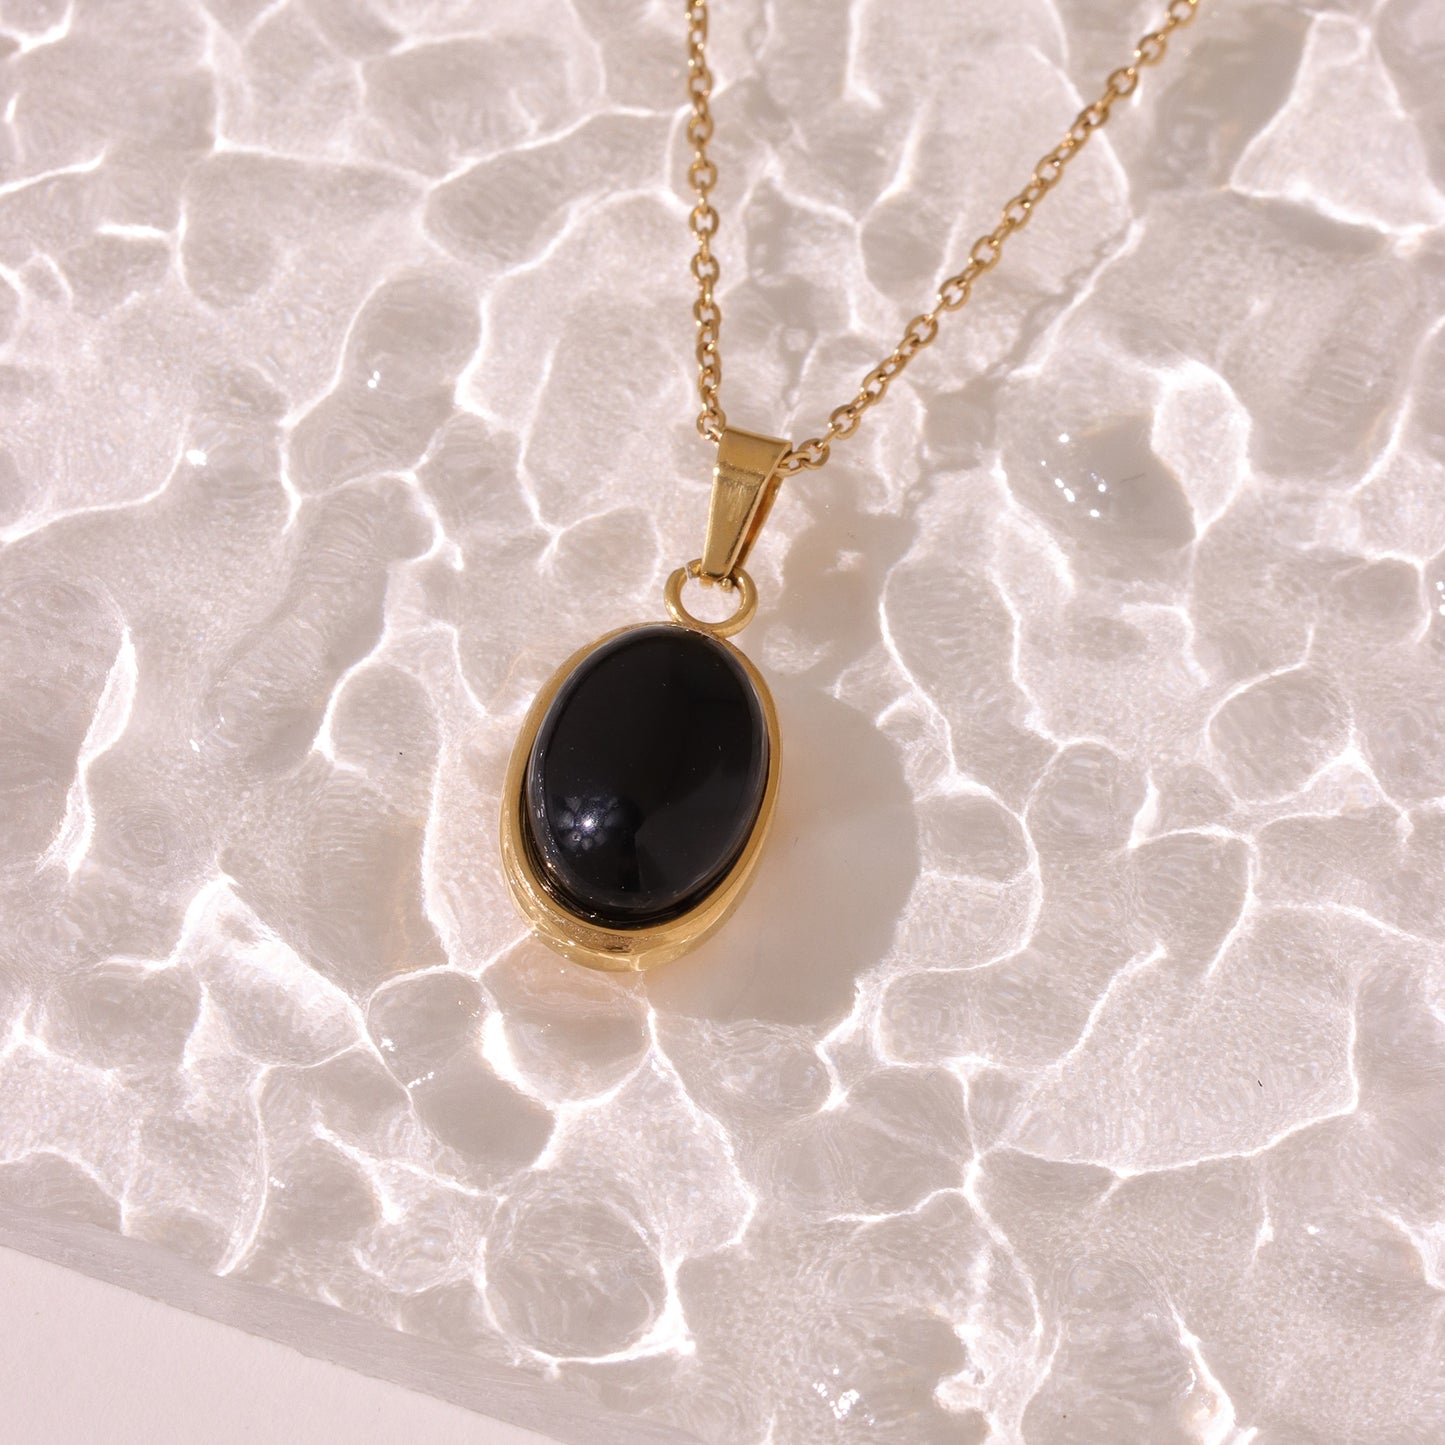 Black Dainty Spiritual Jewelry | Spiritual Style and Aesthetic, Elemental Collection